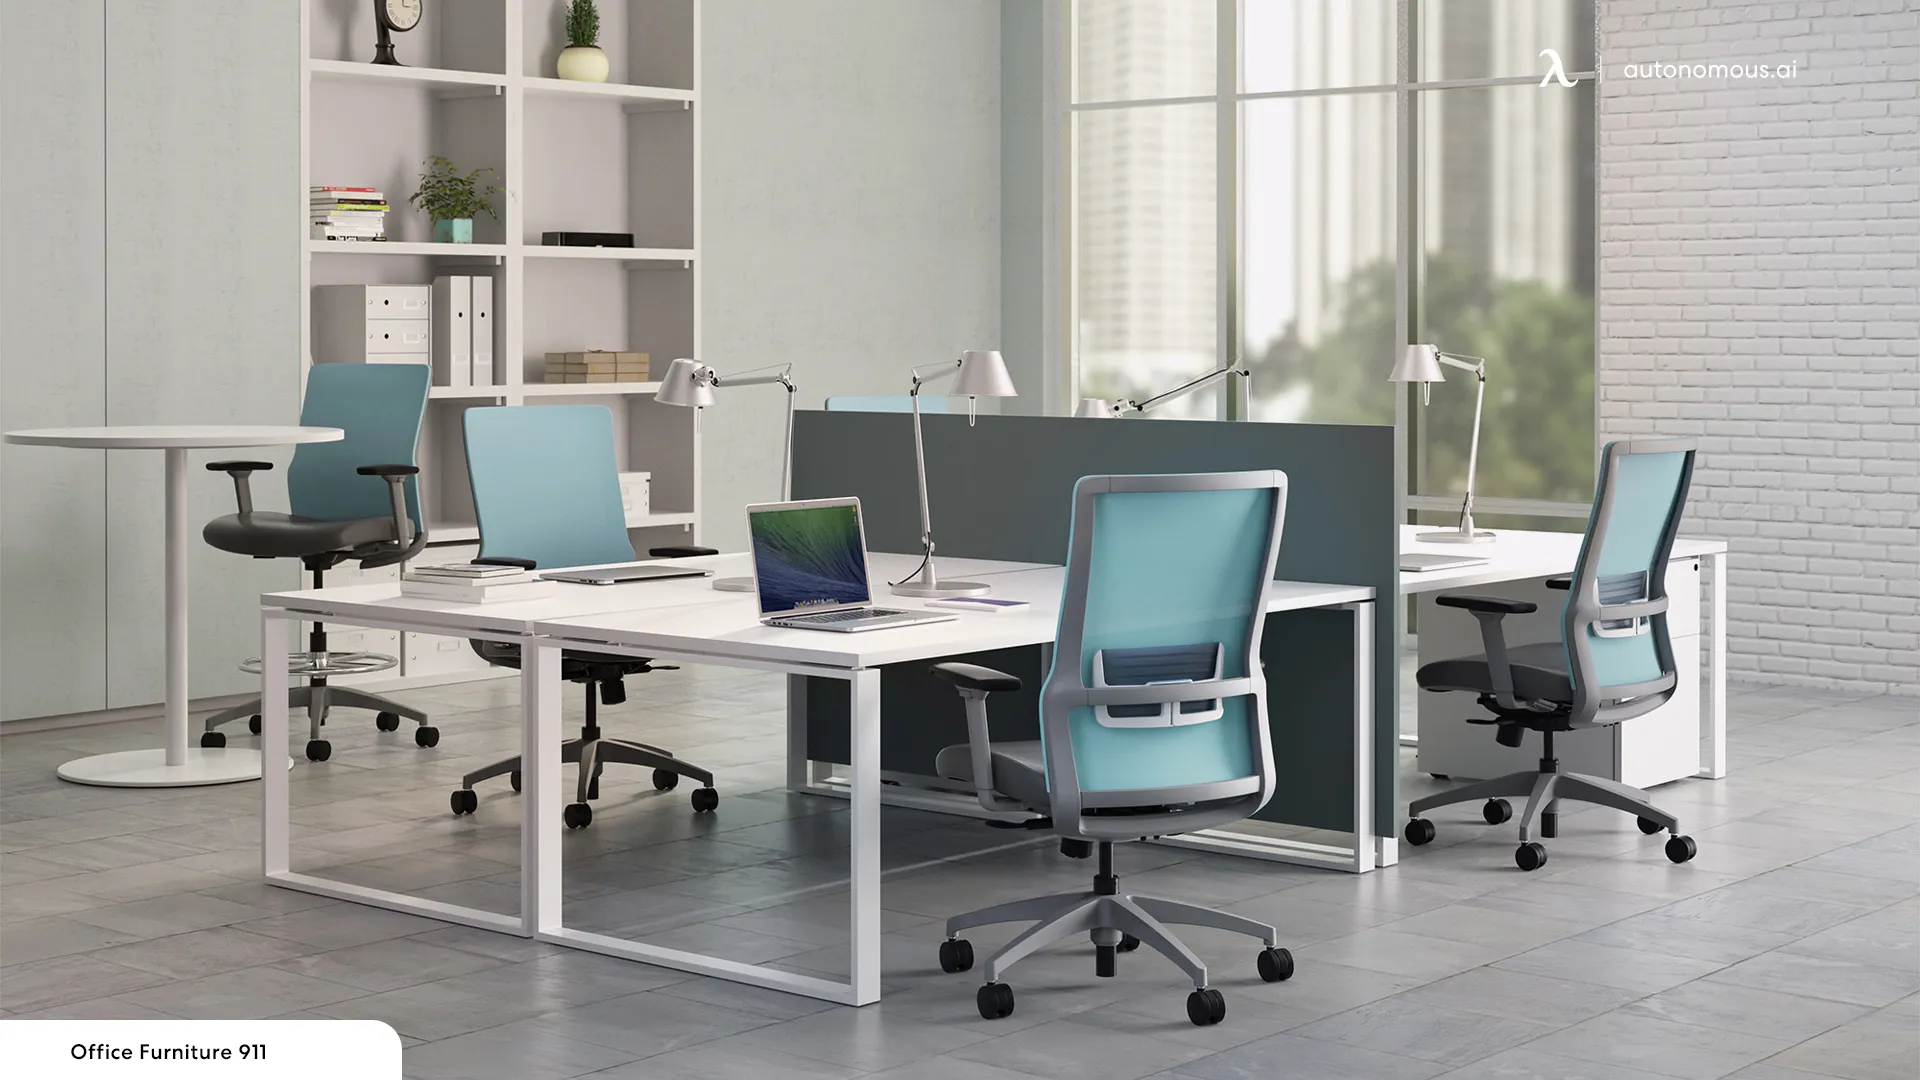 Factors to Consider When Buying Office Furniture in Tampa